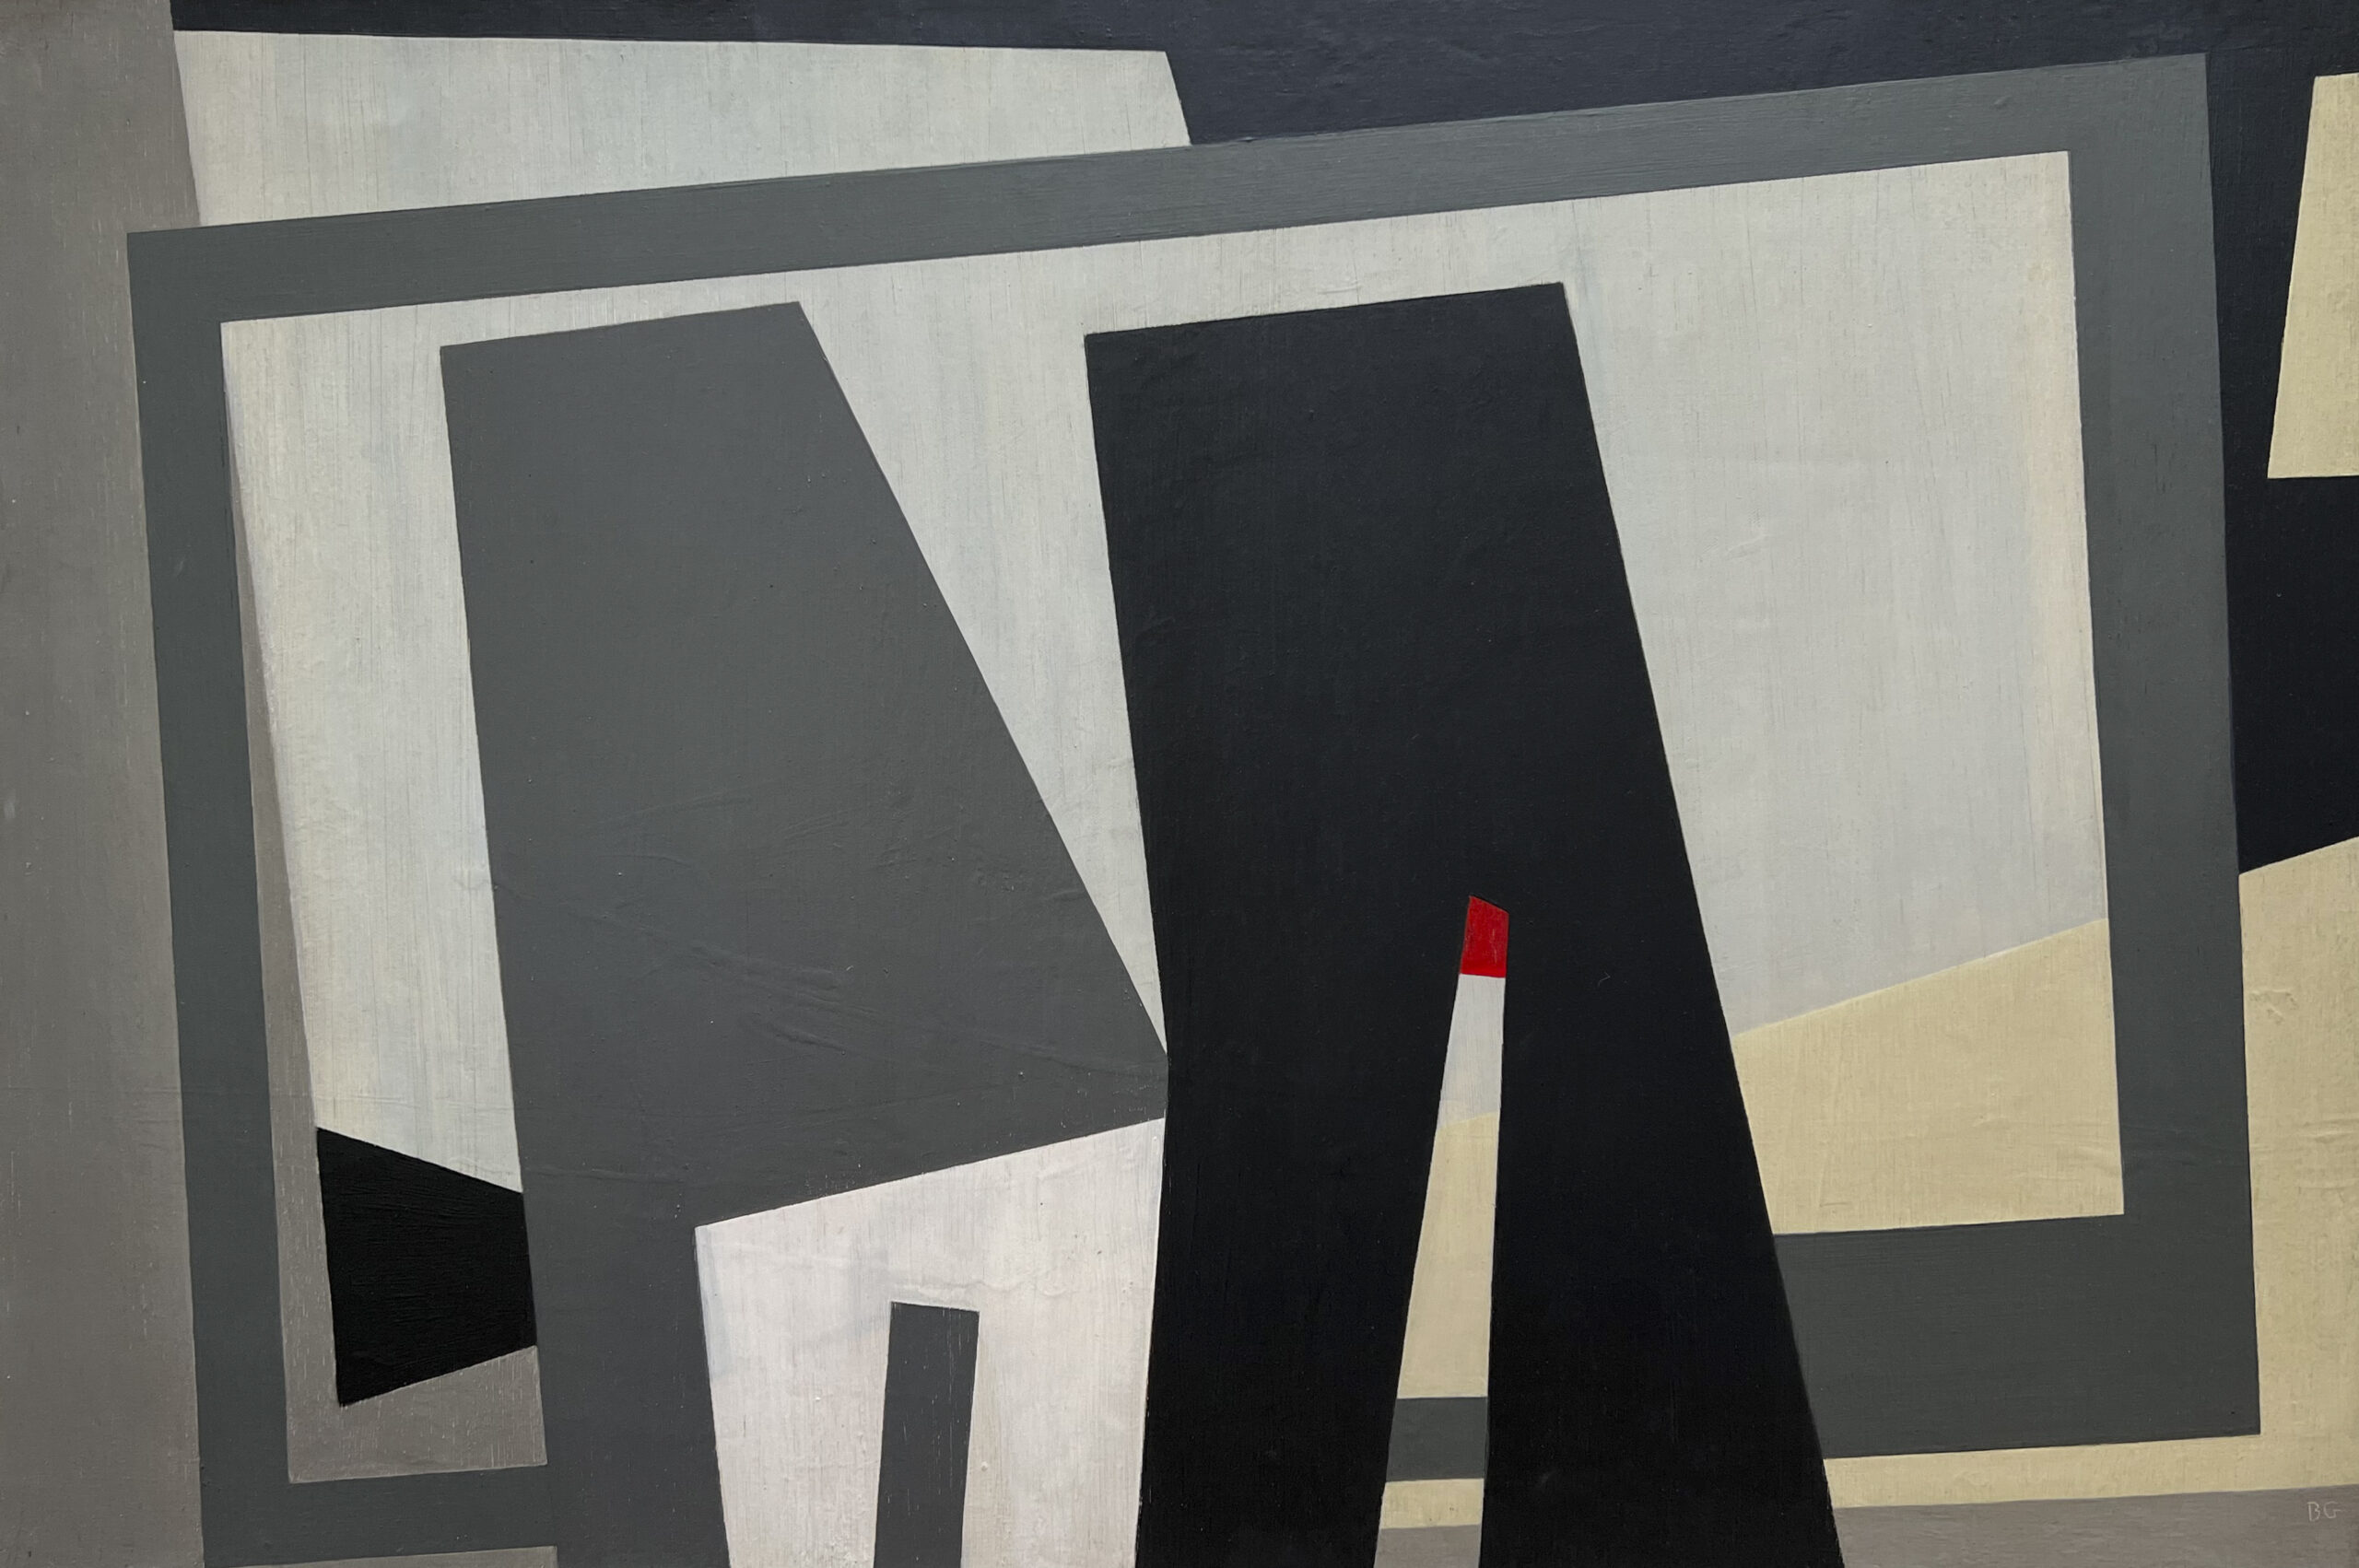 Visit Greene - Two grey and black vertical forms are set against a light grey and tan background framed in darker grey outlines. A small spot of red sits inside the form on the right.